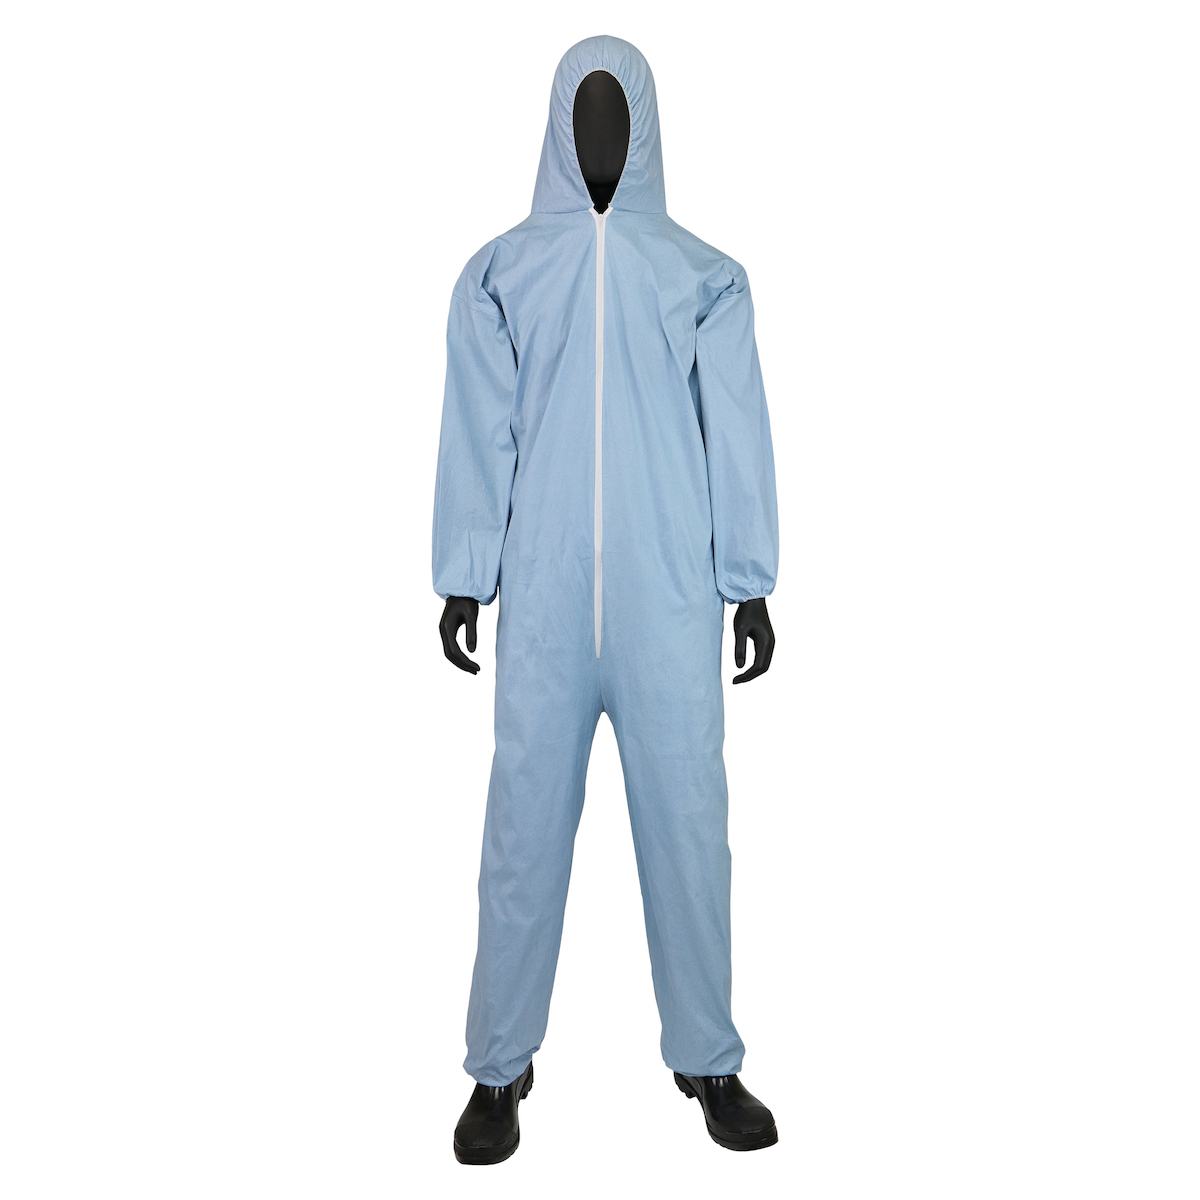 Posi-Wear® FR™ Flame Resistant Coverall with Hood, Elastic Wrists and Ankles - Disposable Clothing